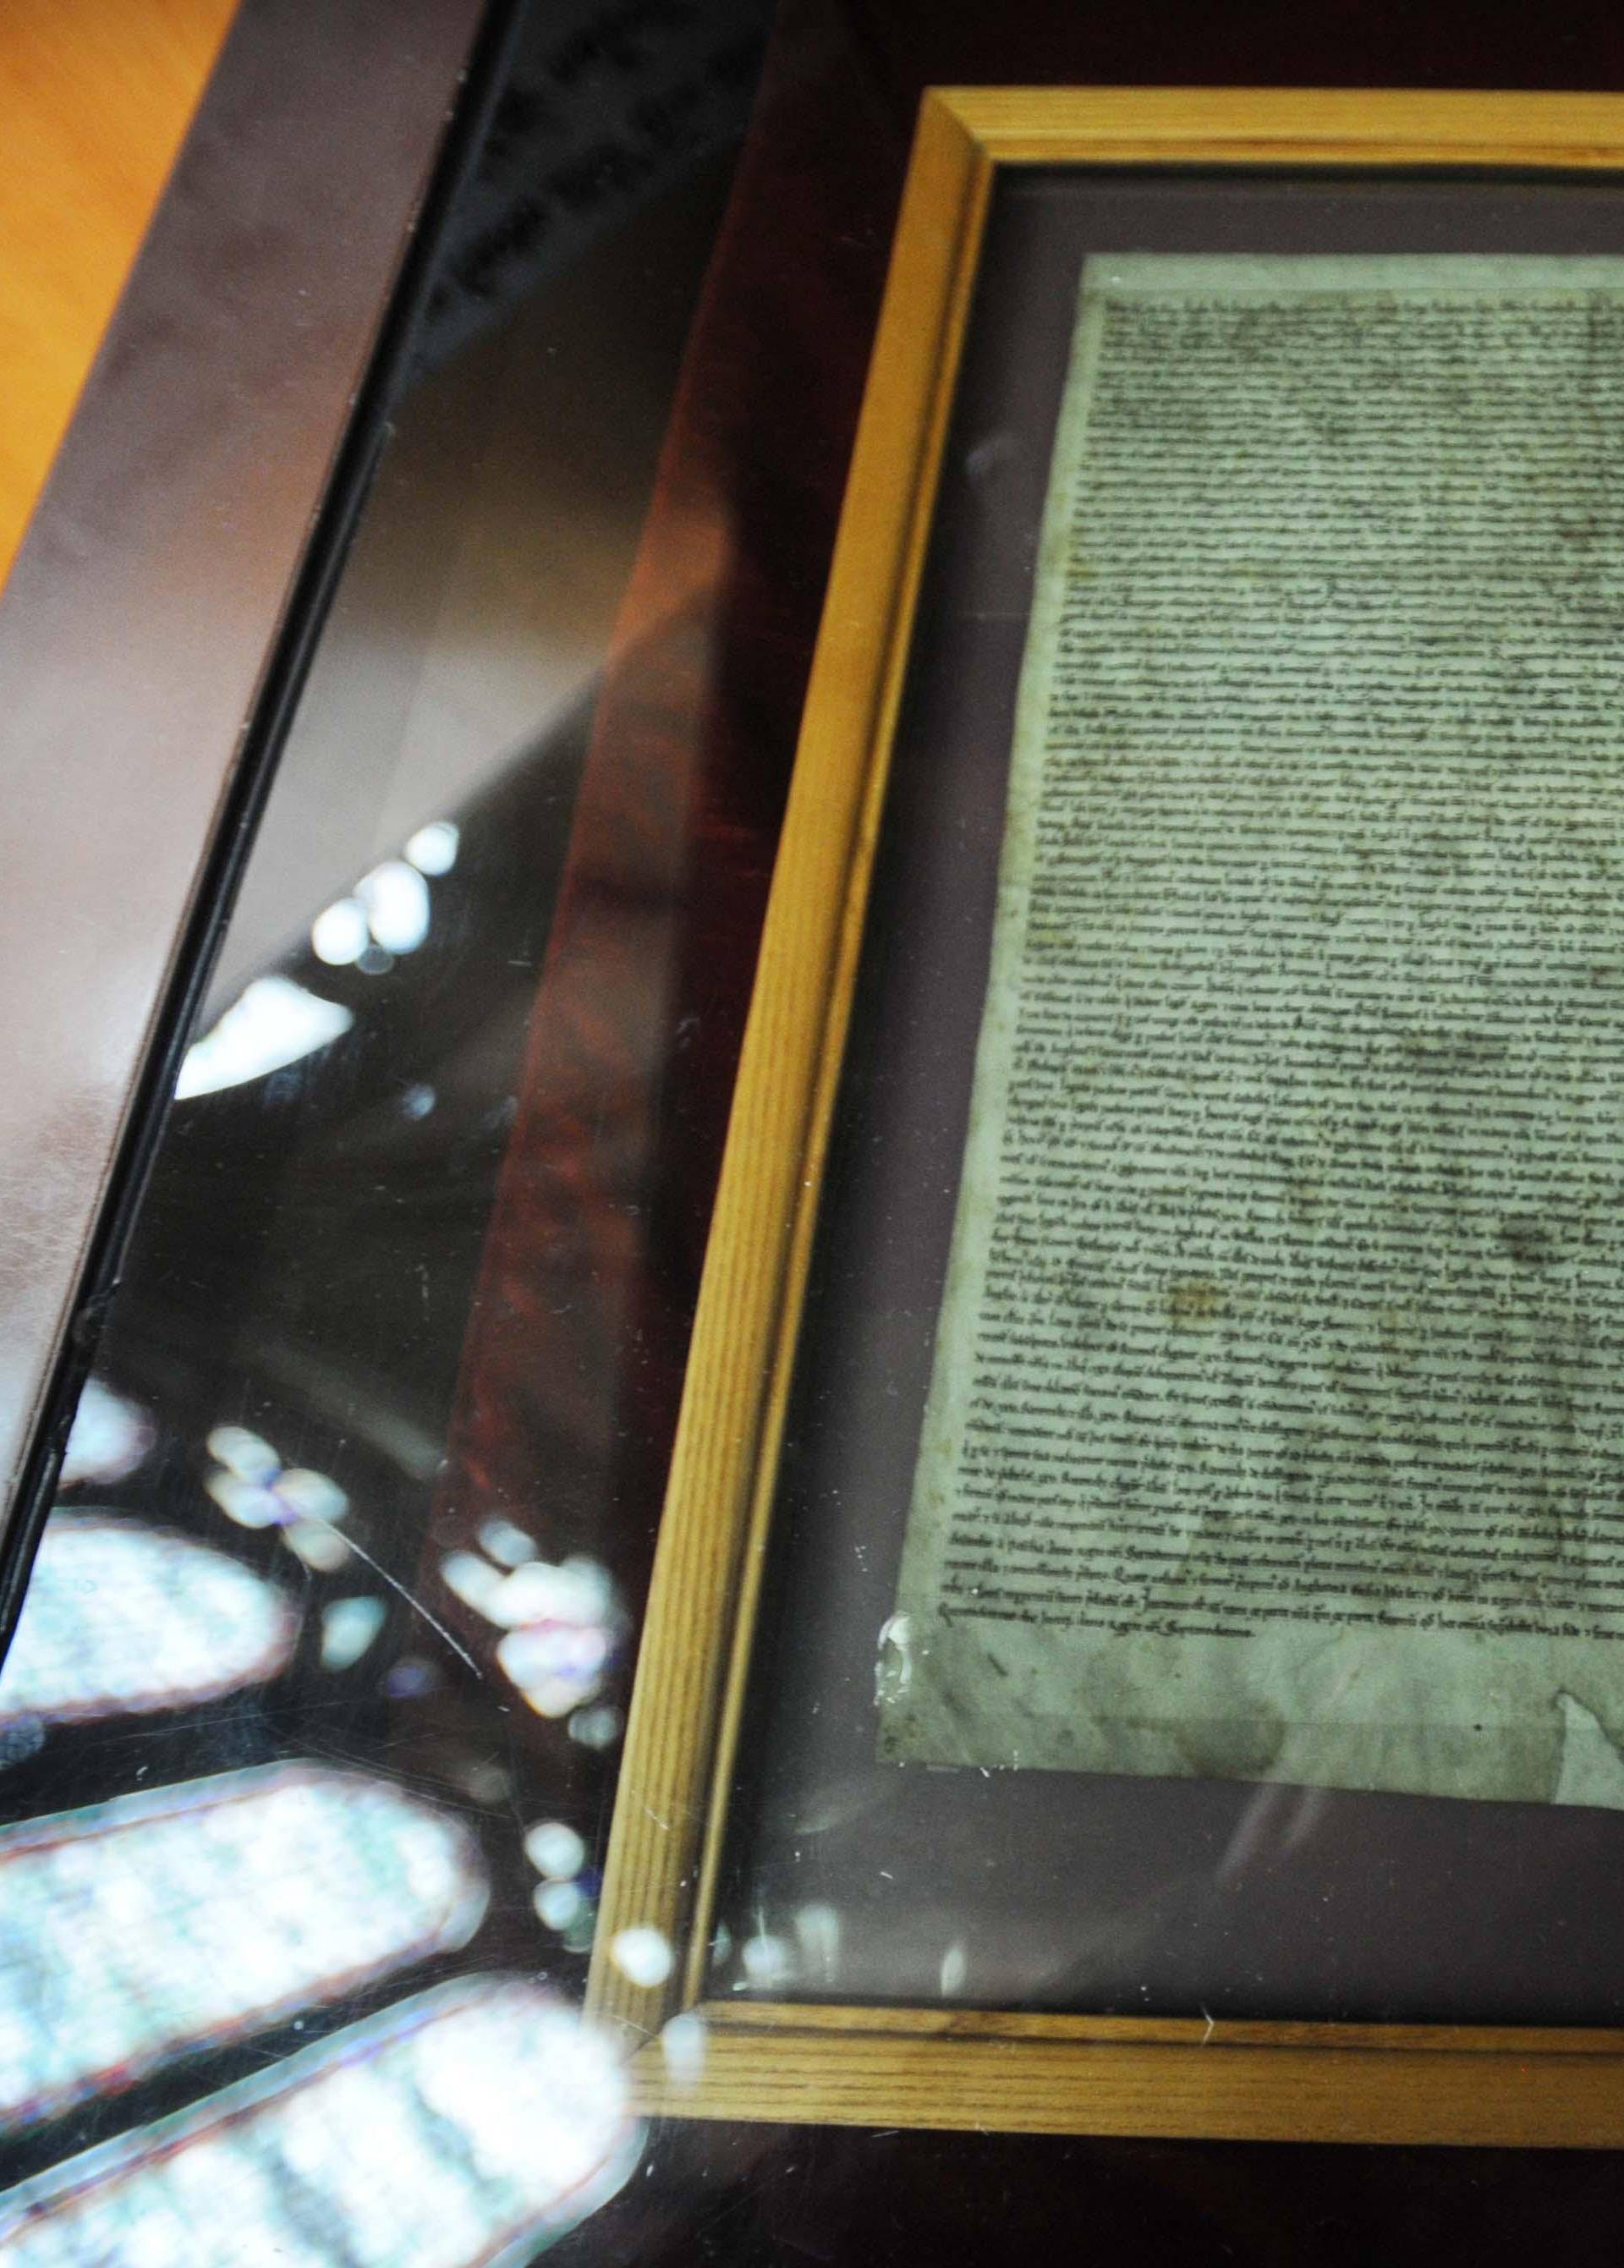 Attempted theft of Magna Carta